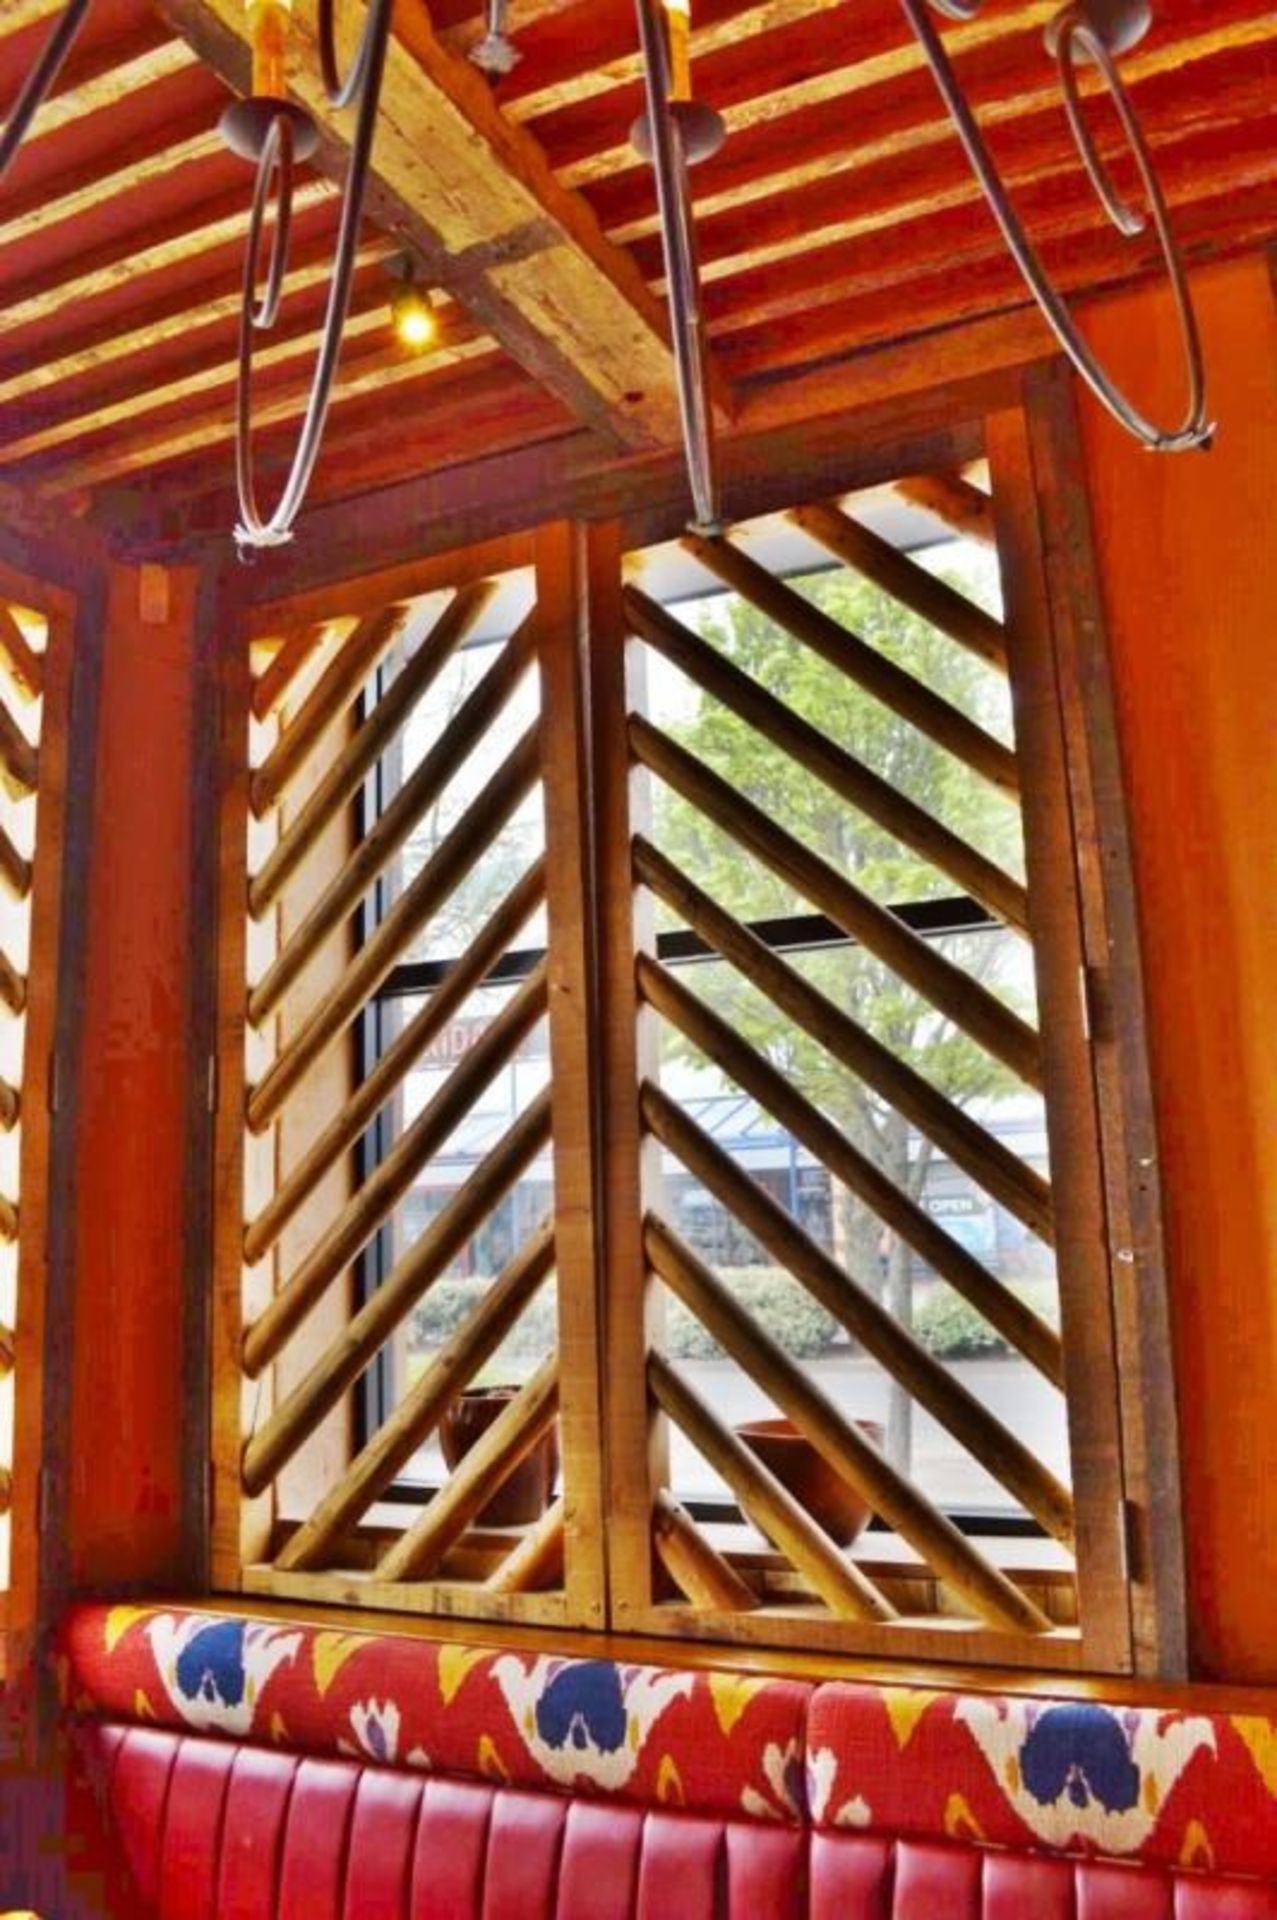 4 x Wooden Timber Window Shutters - Each Shutter Features Two Timber Frames With Round Wood - Image 3 of 5